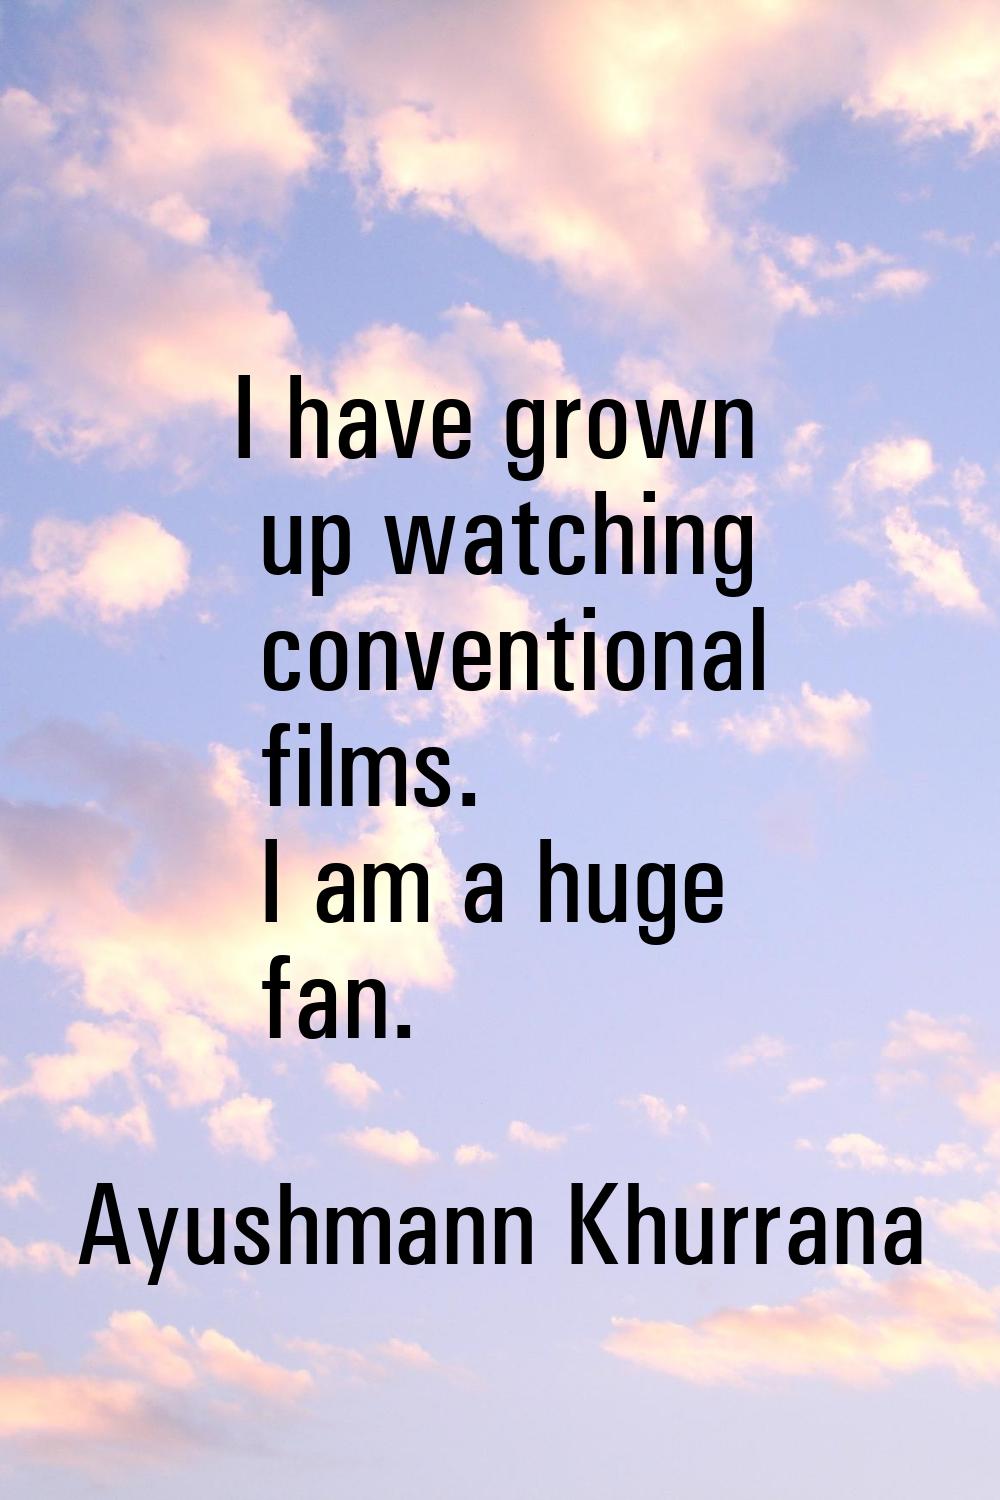 I have grown up watching conventional films. I am a huge fan.